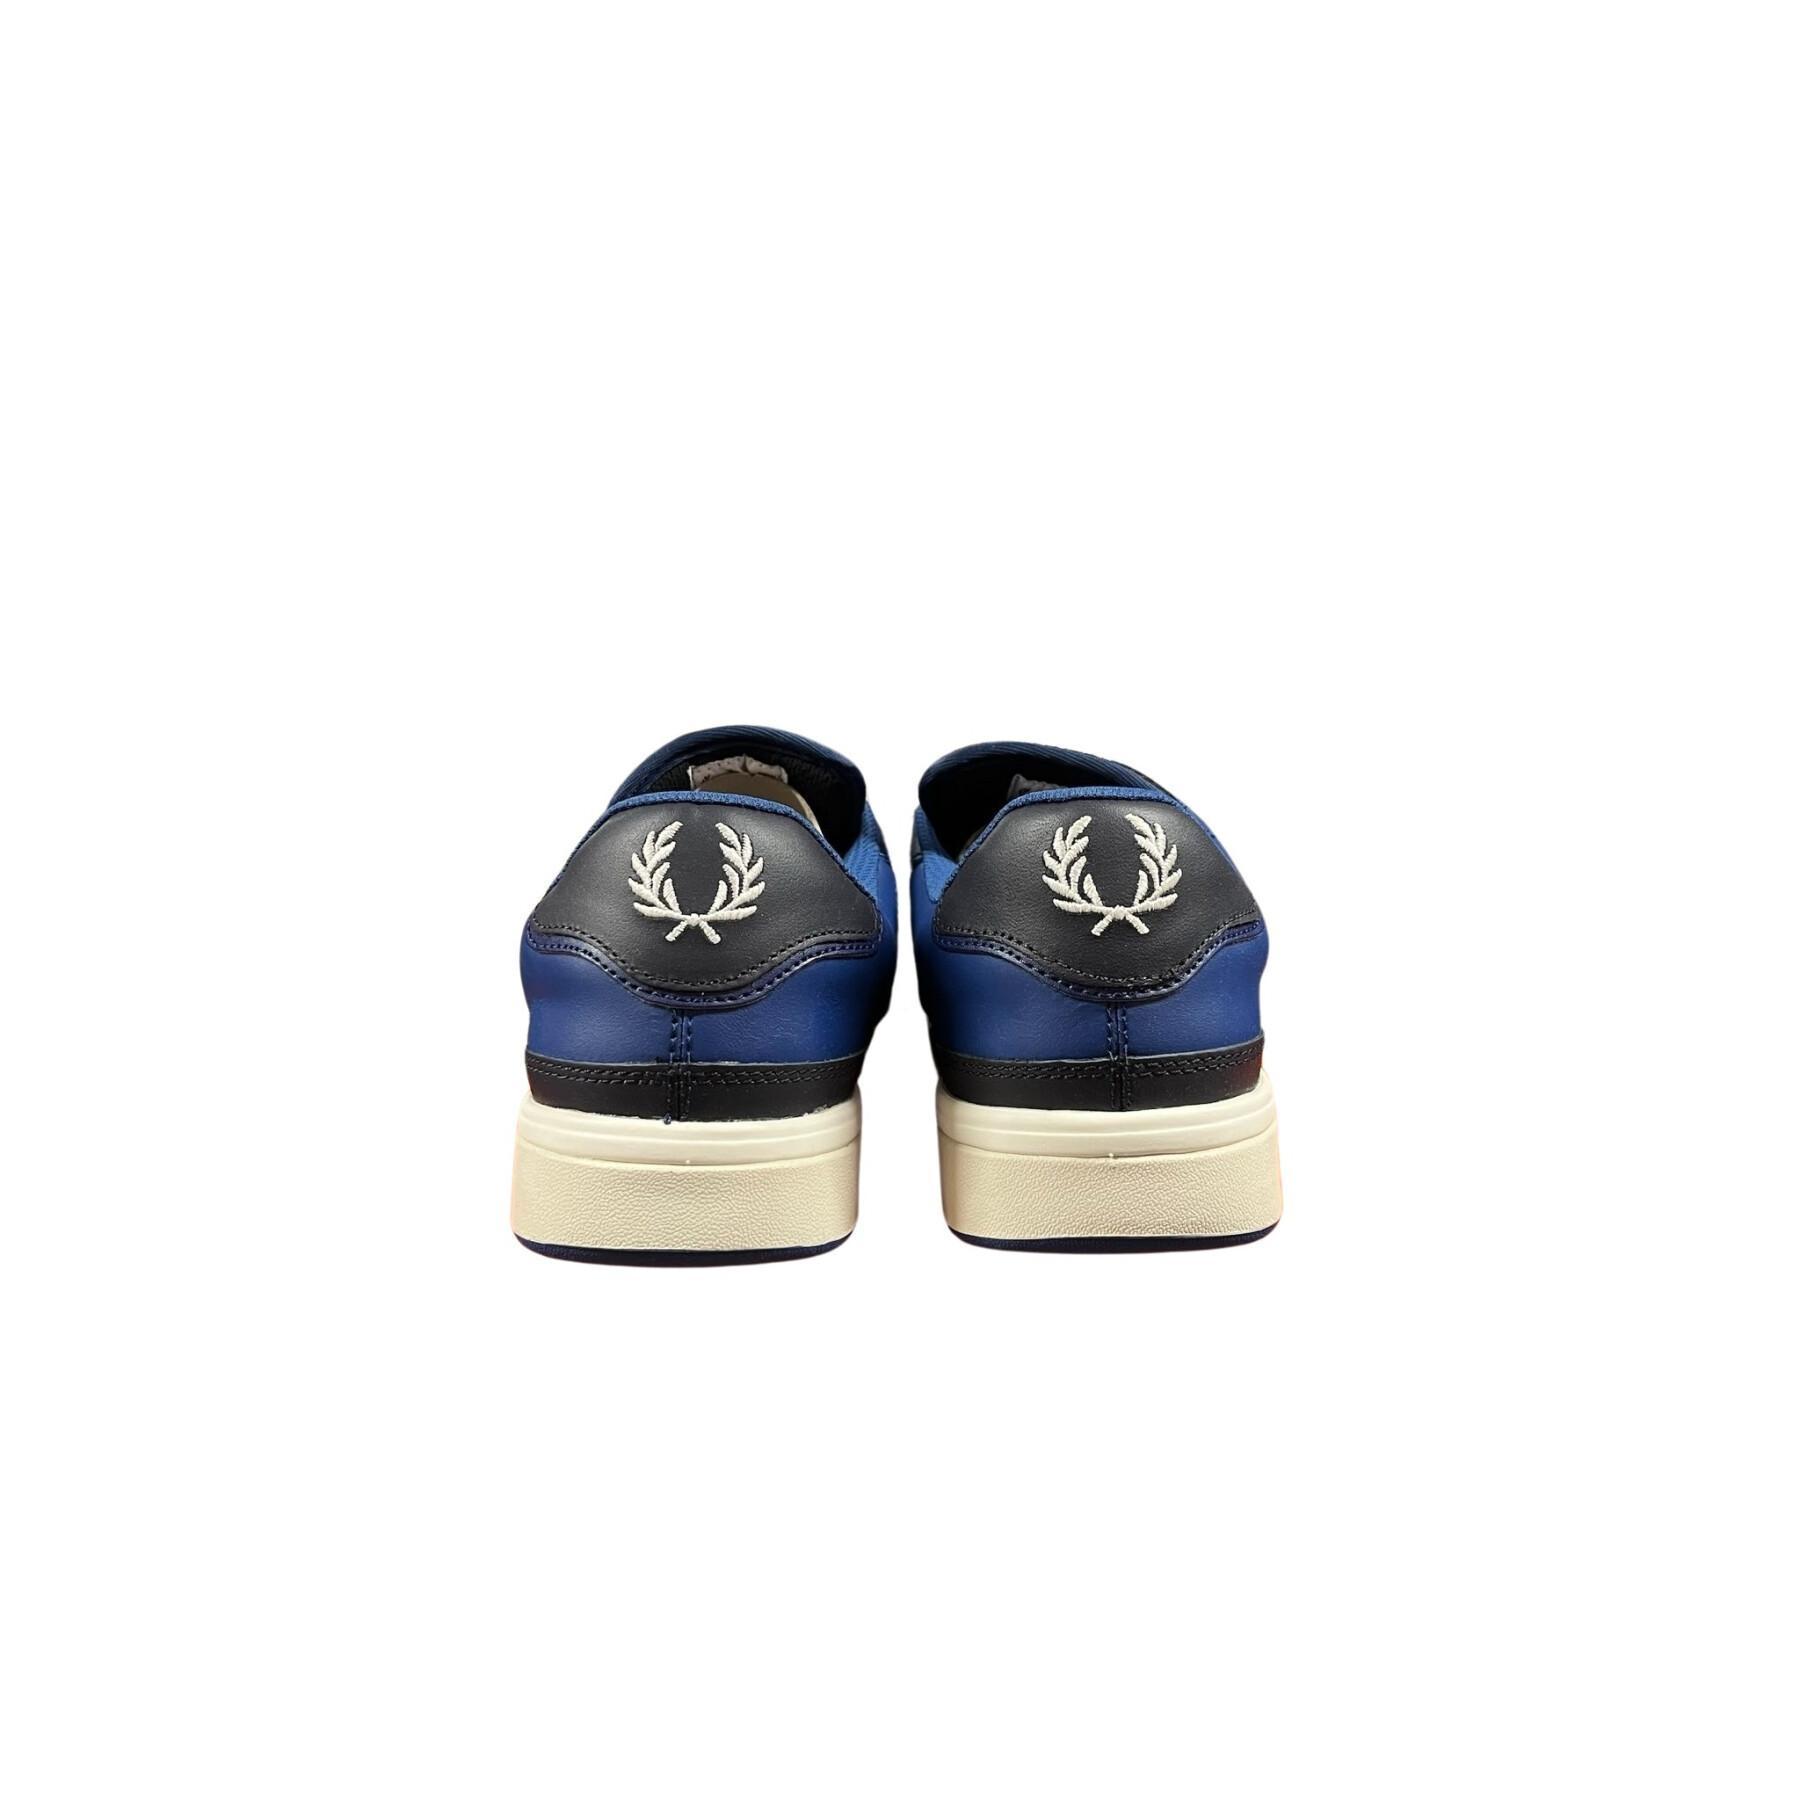 Ténis Fred Perry Leather Mesh